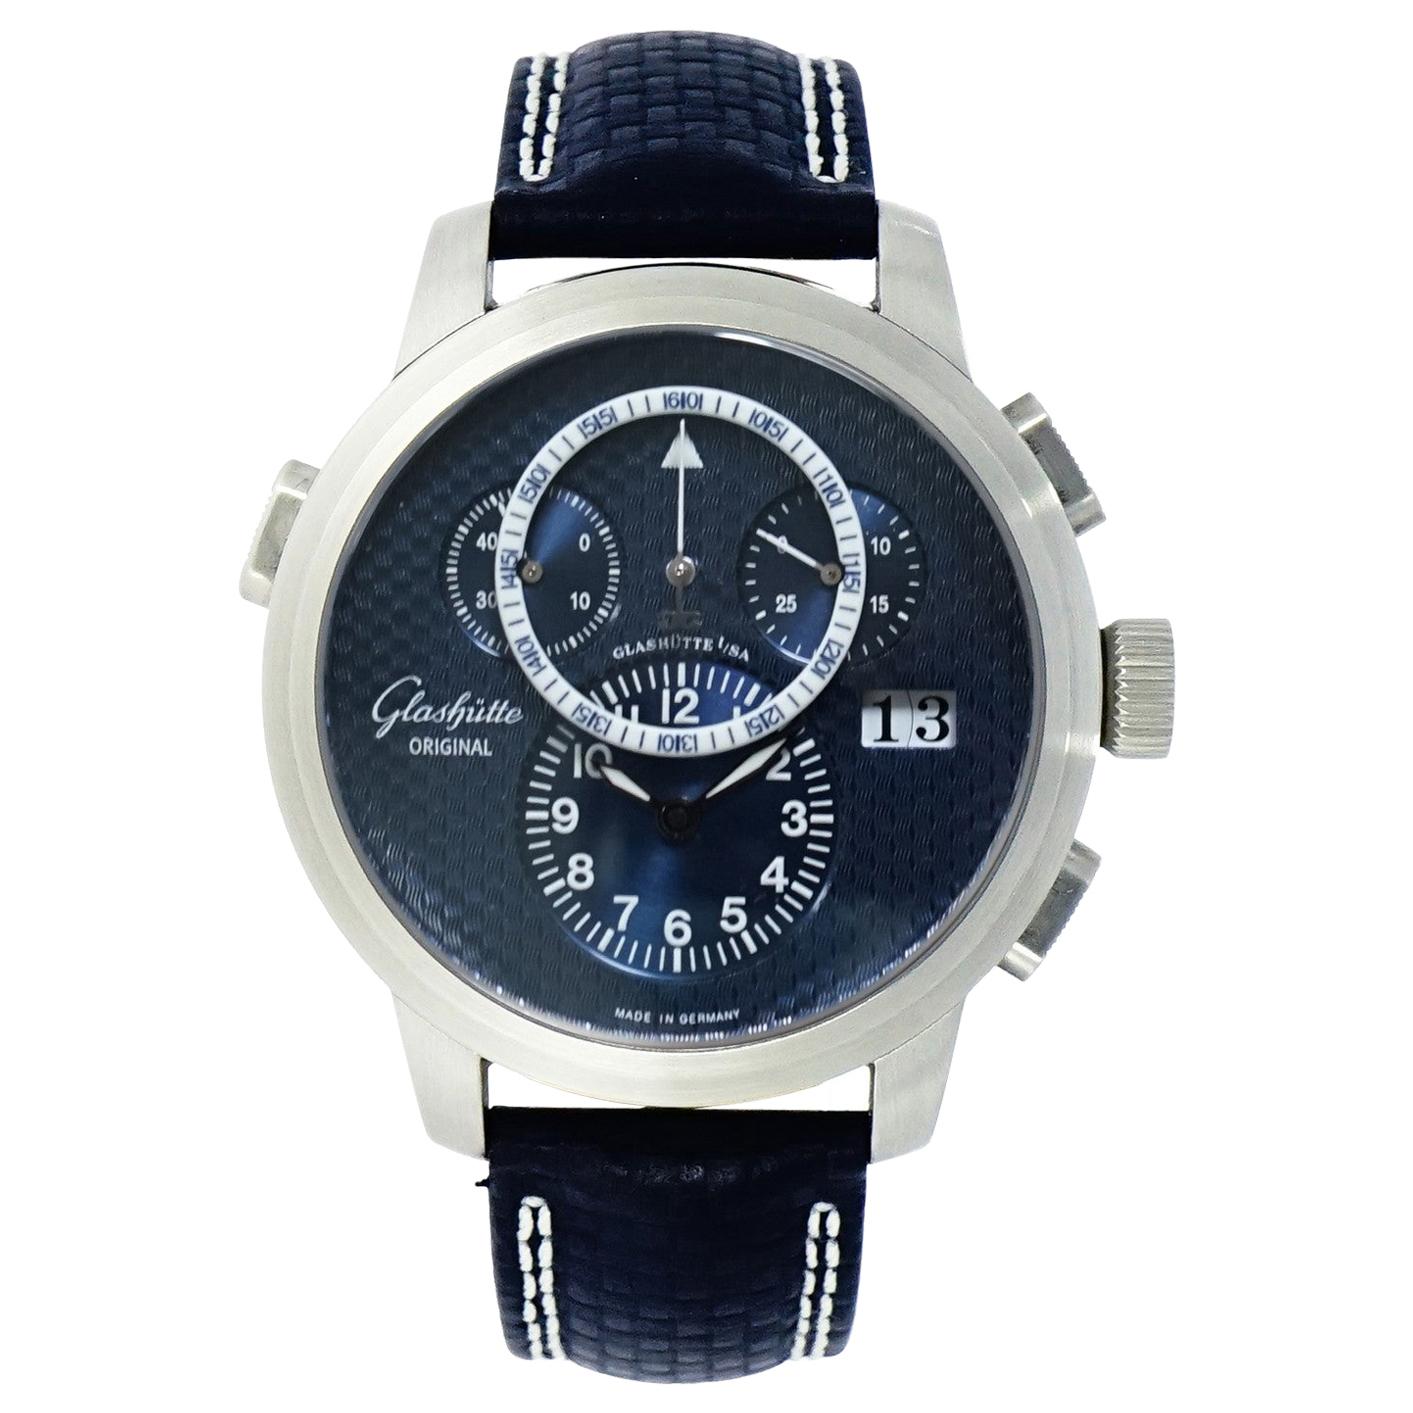 Glashutte PanoMatic Chrono XL in Platinum 95-01-05-15-04 Limited Edition